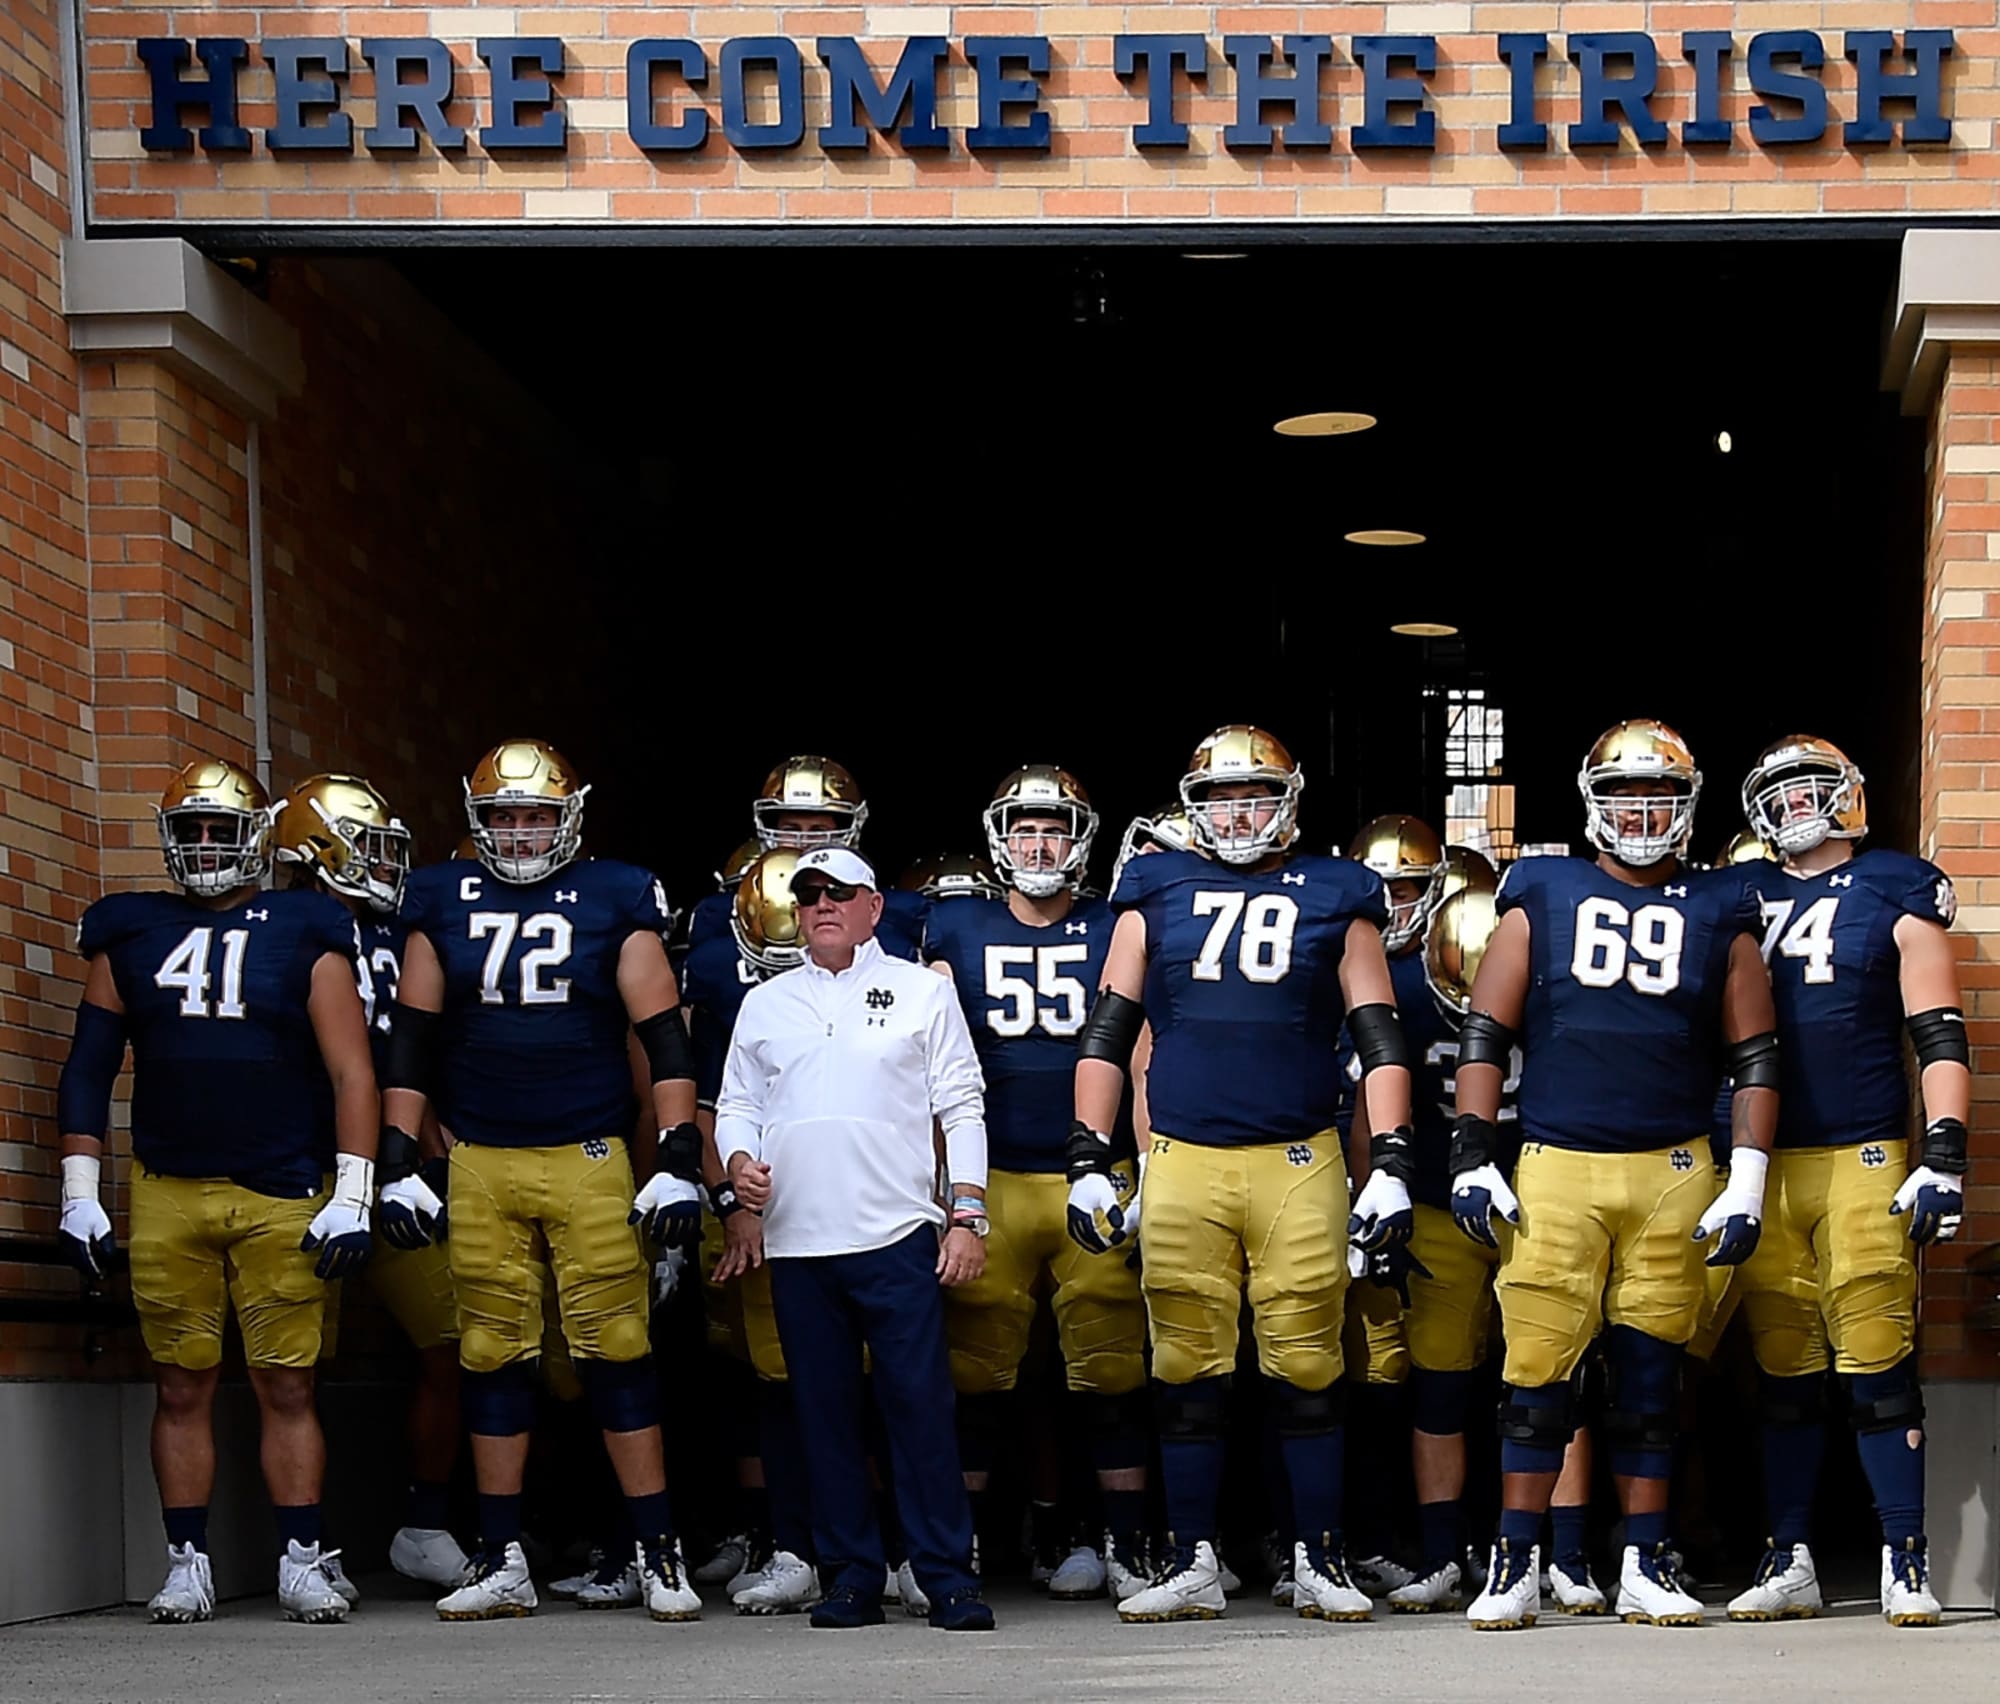 Notre Dame Football: Predicting where the first loss will occur - Slap the Sign